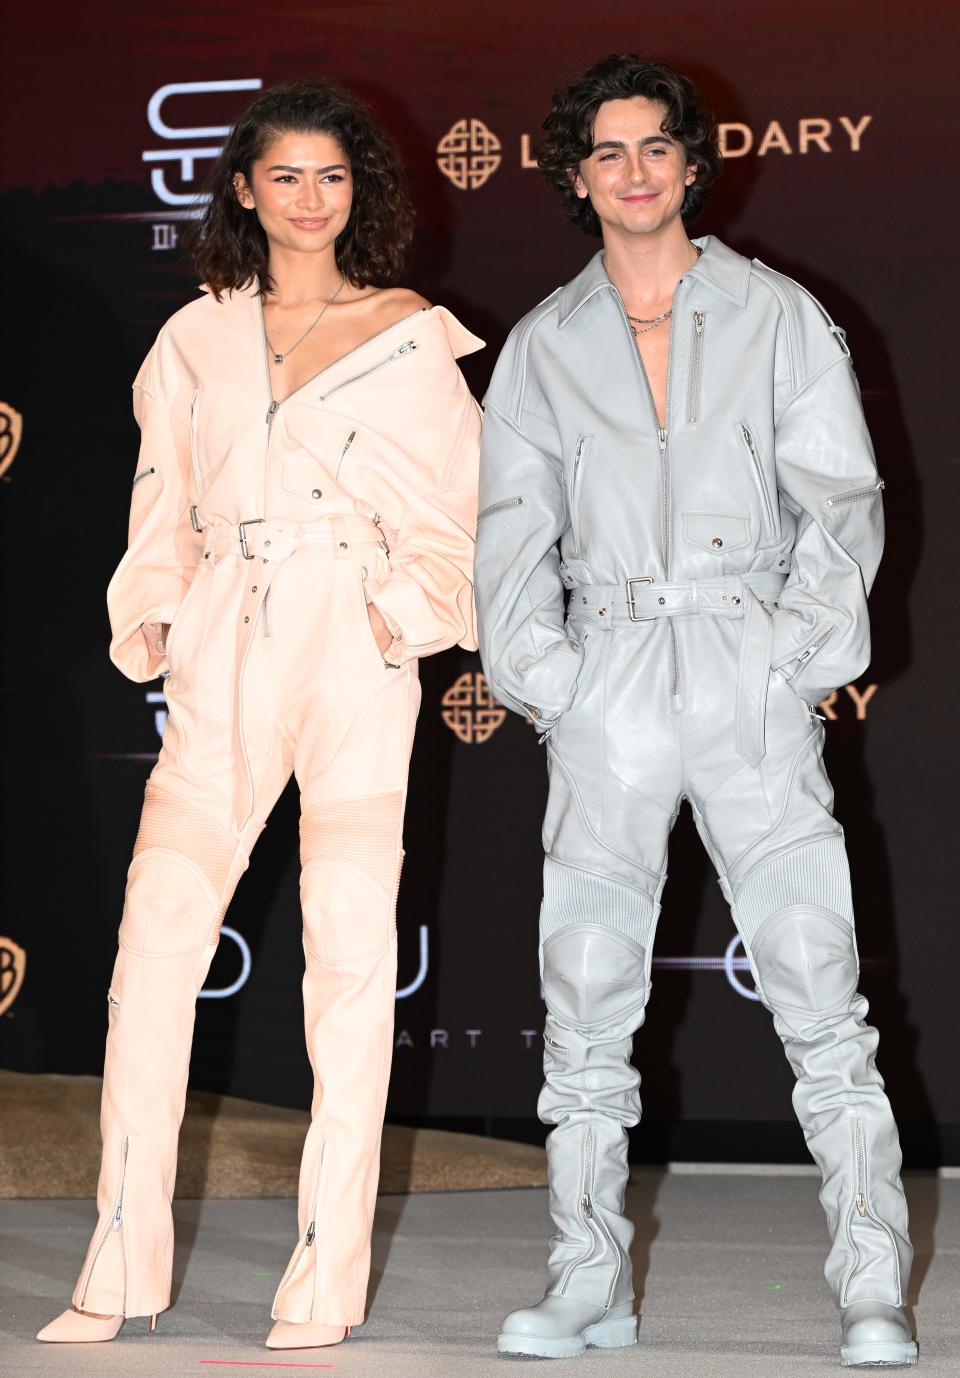 At a Dune: Part Two press conference in Seoul, Zendaya and Timothée Chalamet wore coordinating Juun.J boilersuits.